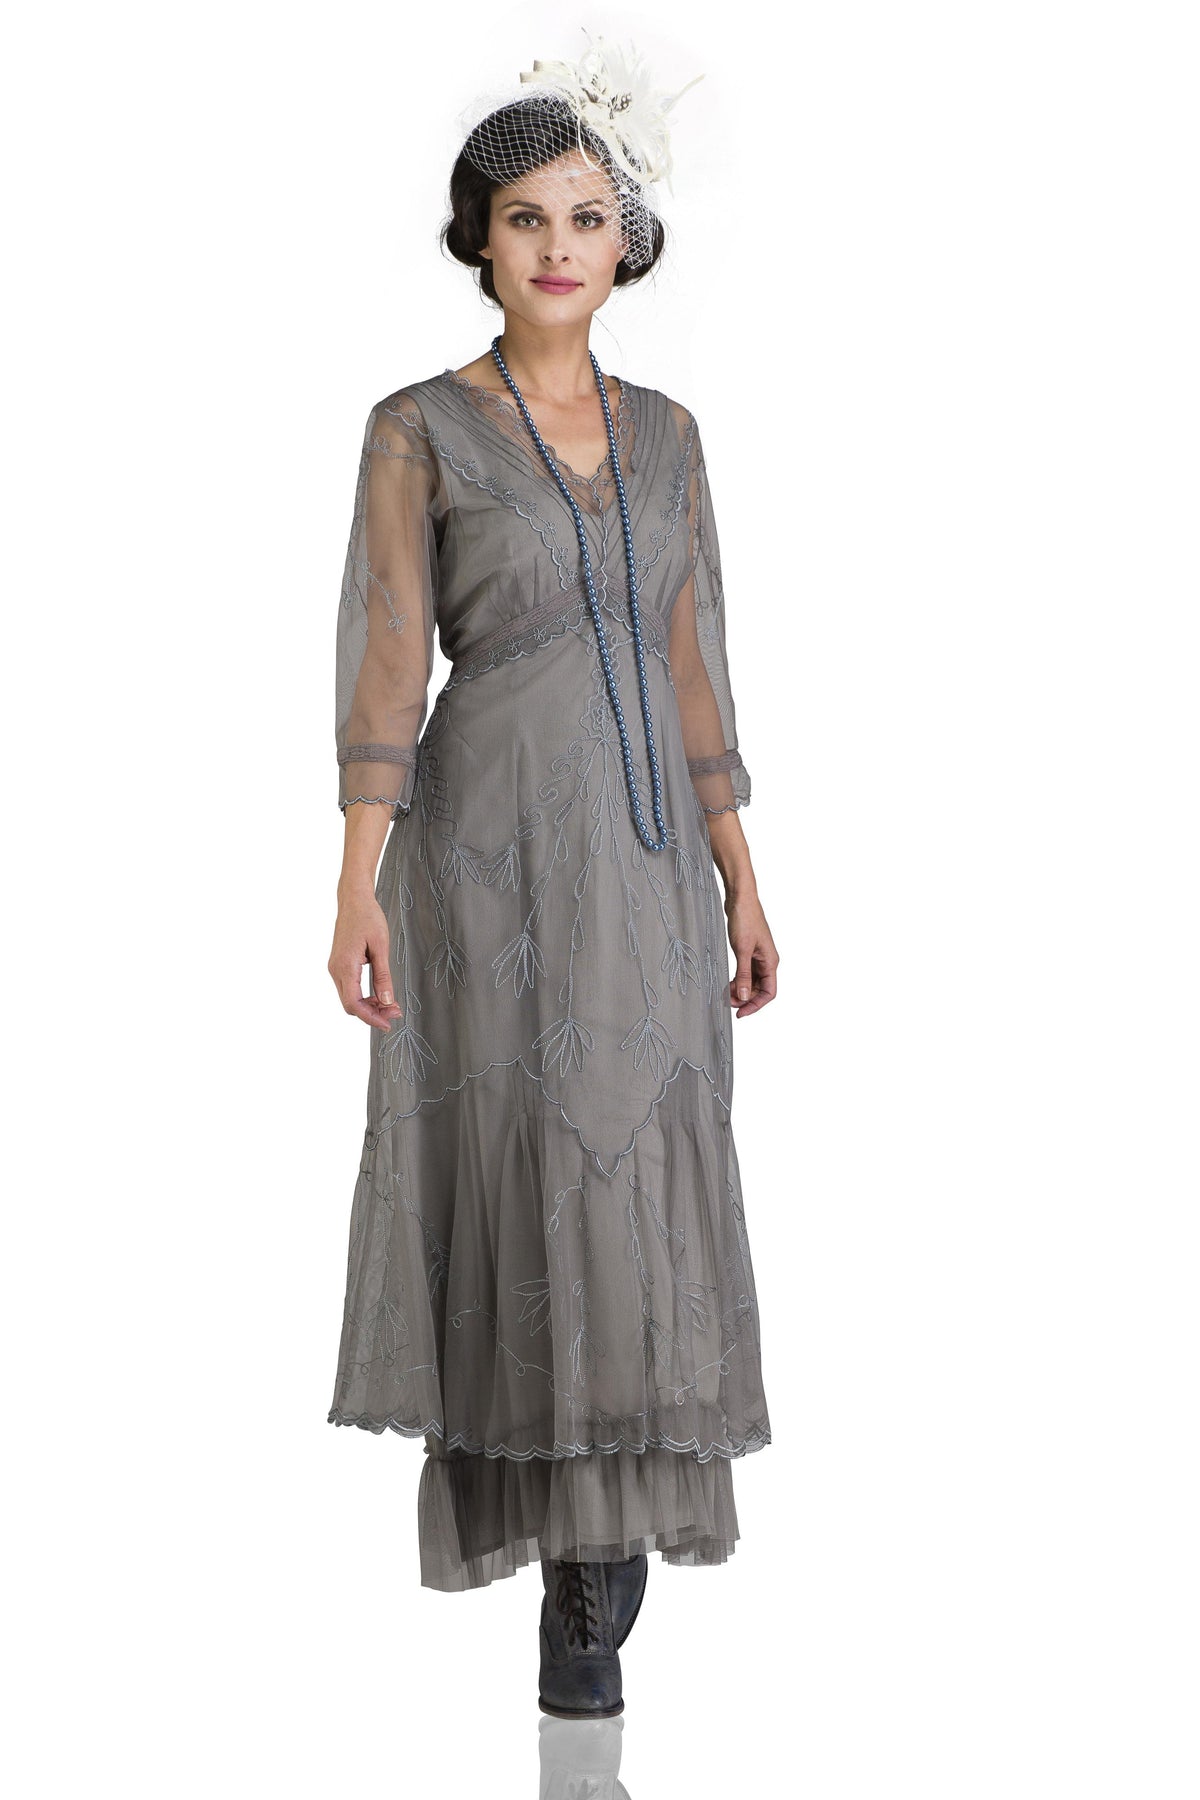 Titanic Fashion – 1st Class Women’s Clothing Somewhere in Time Dress in Smoke by Nataya $265.00 AT vintagedancer.com